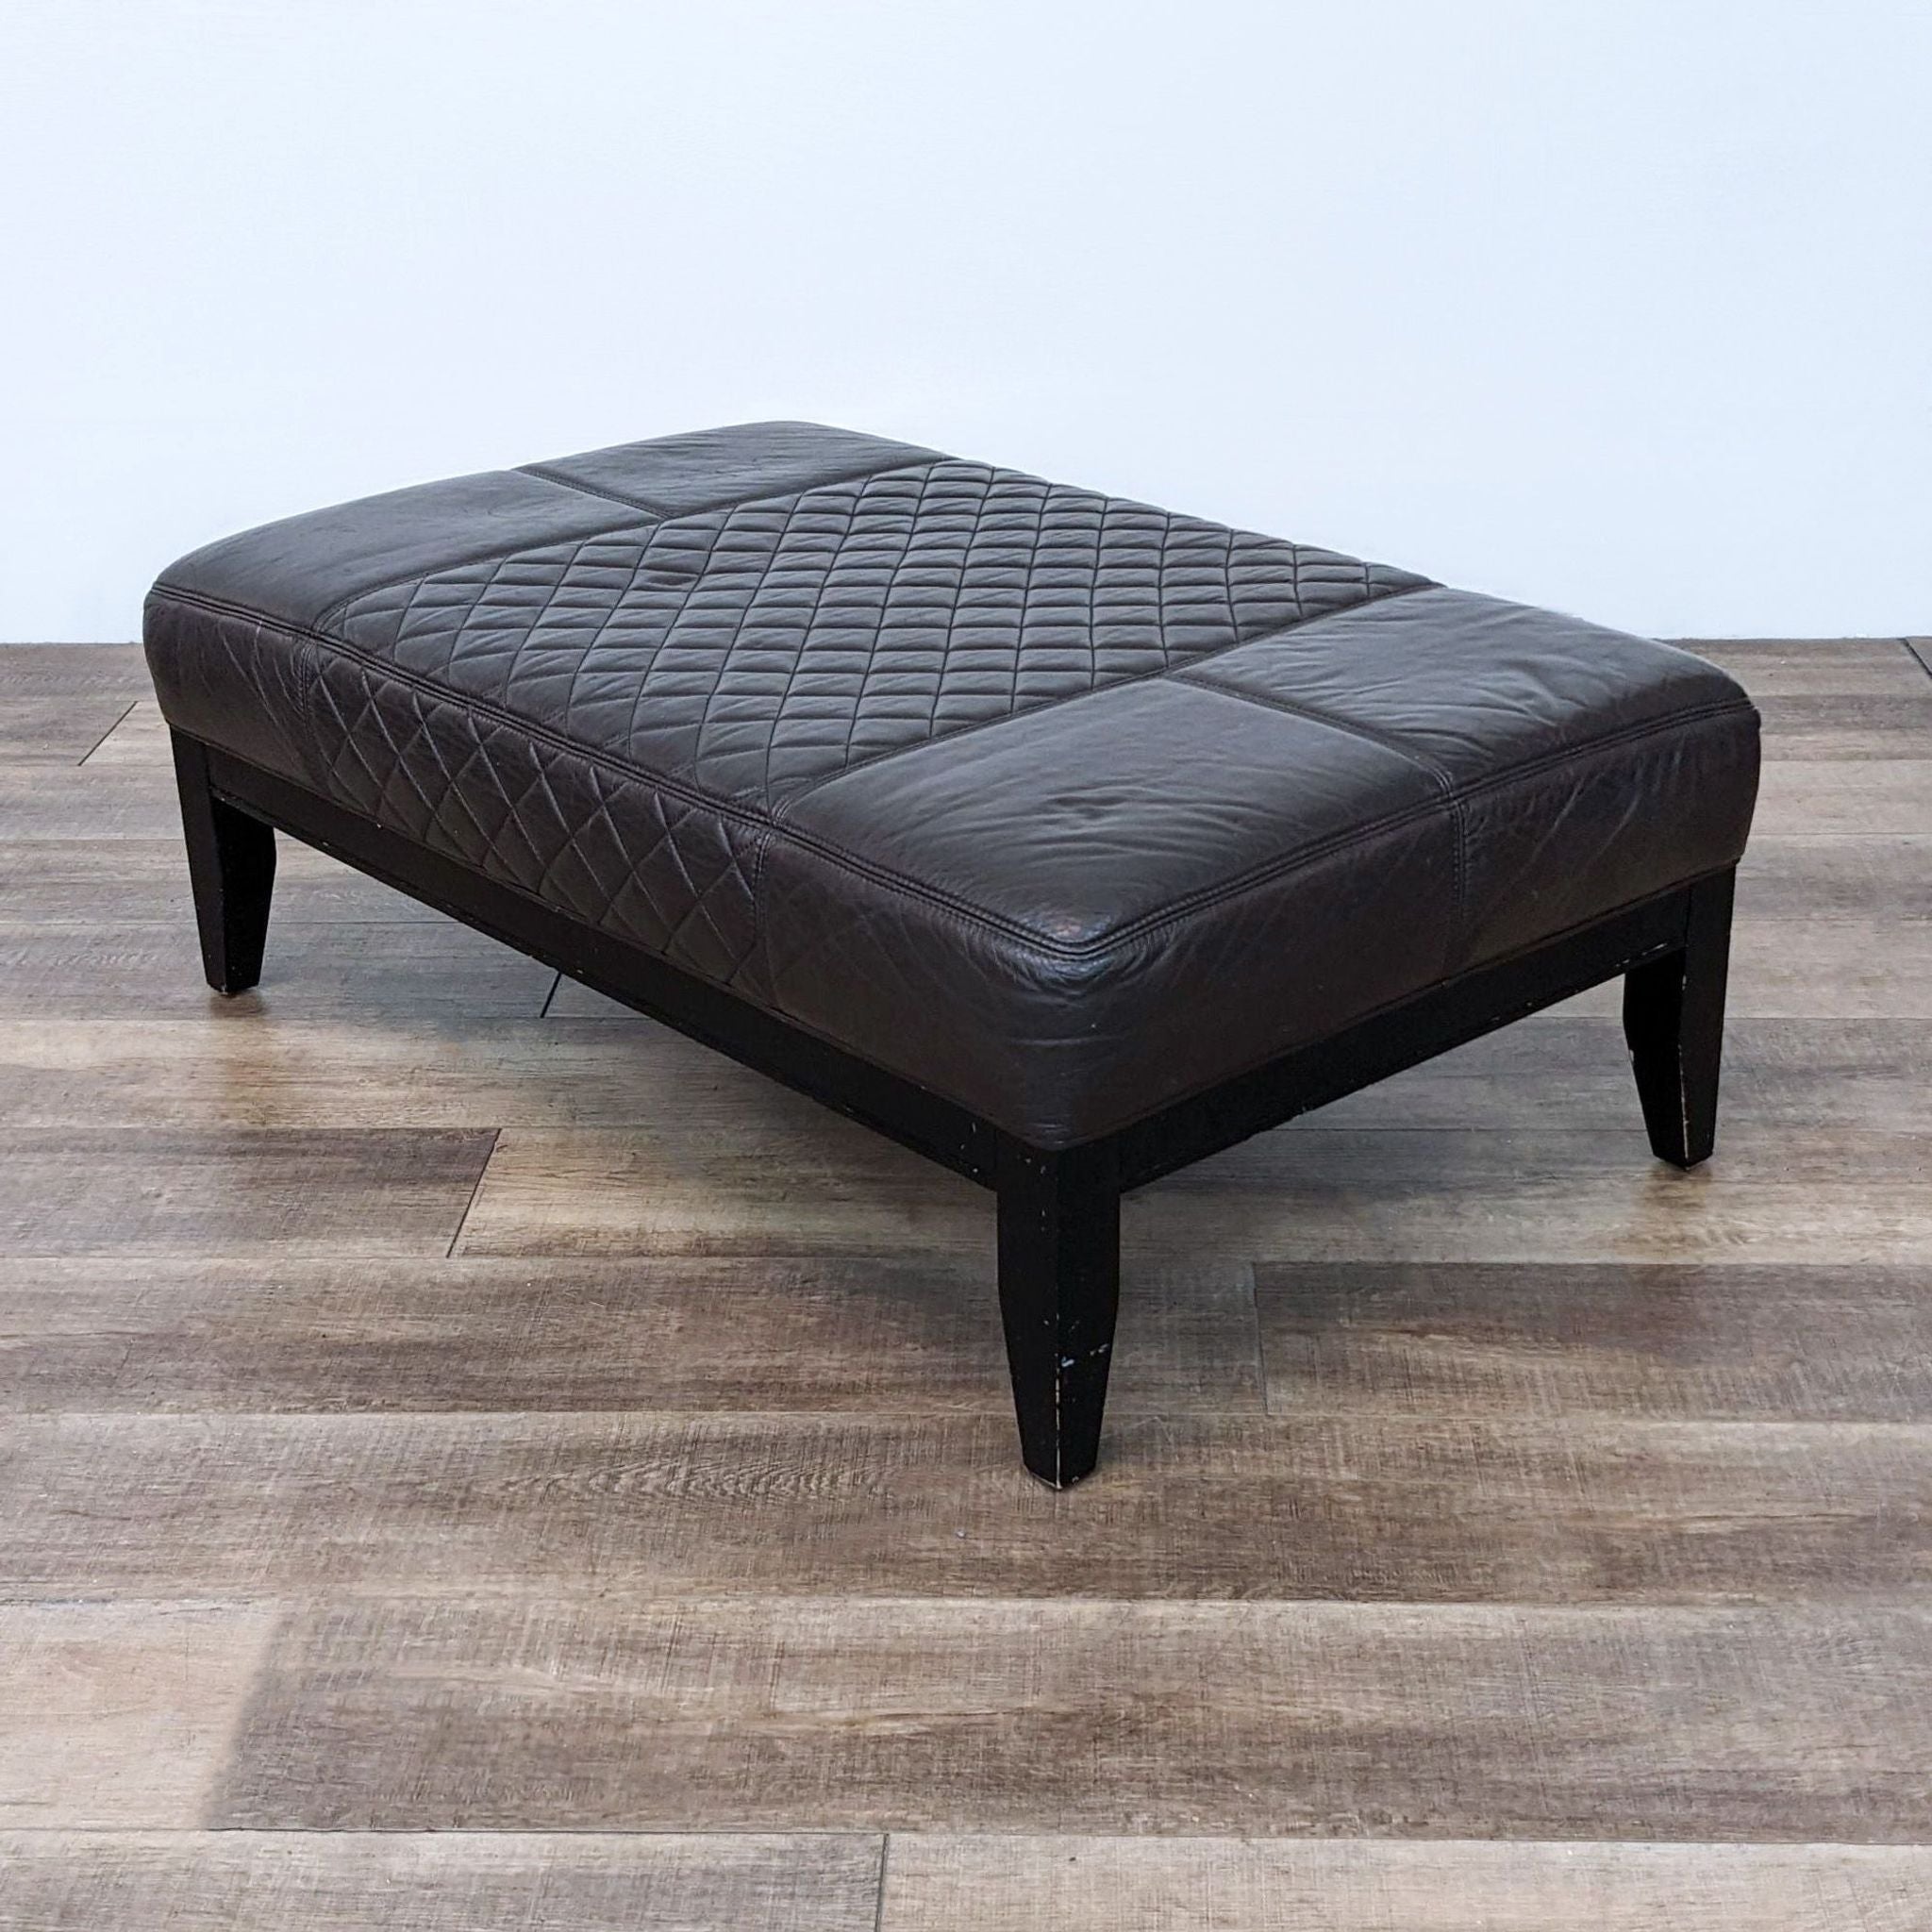 Alt text 2: Frontal view of a brown leather Reperch ottoman with diamond stitching and sturdy wooden feet.